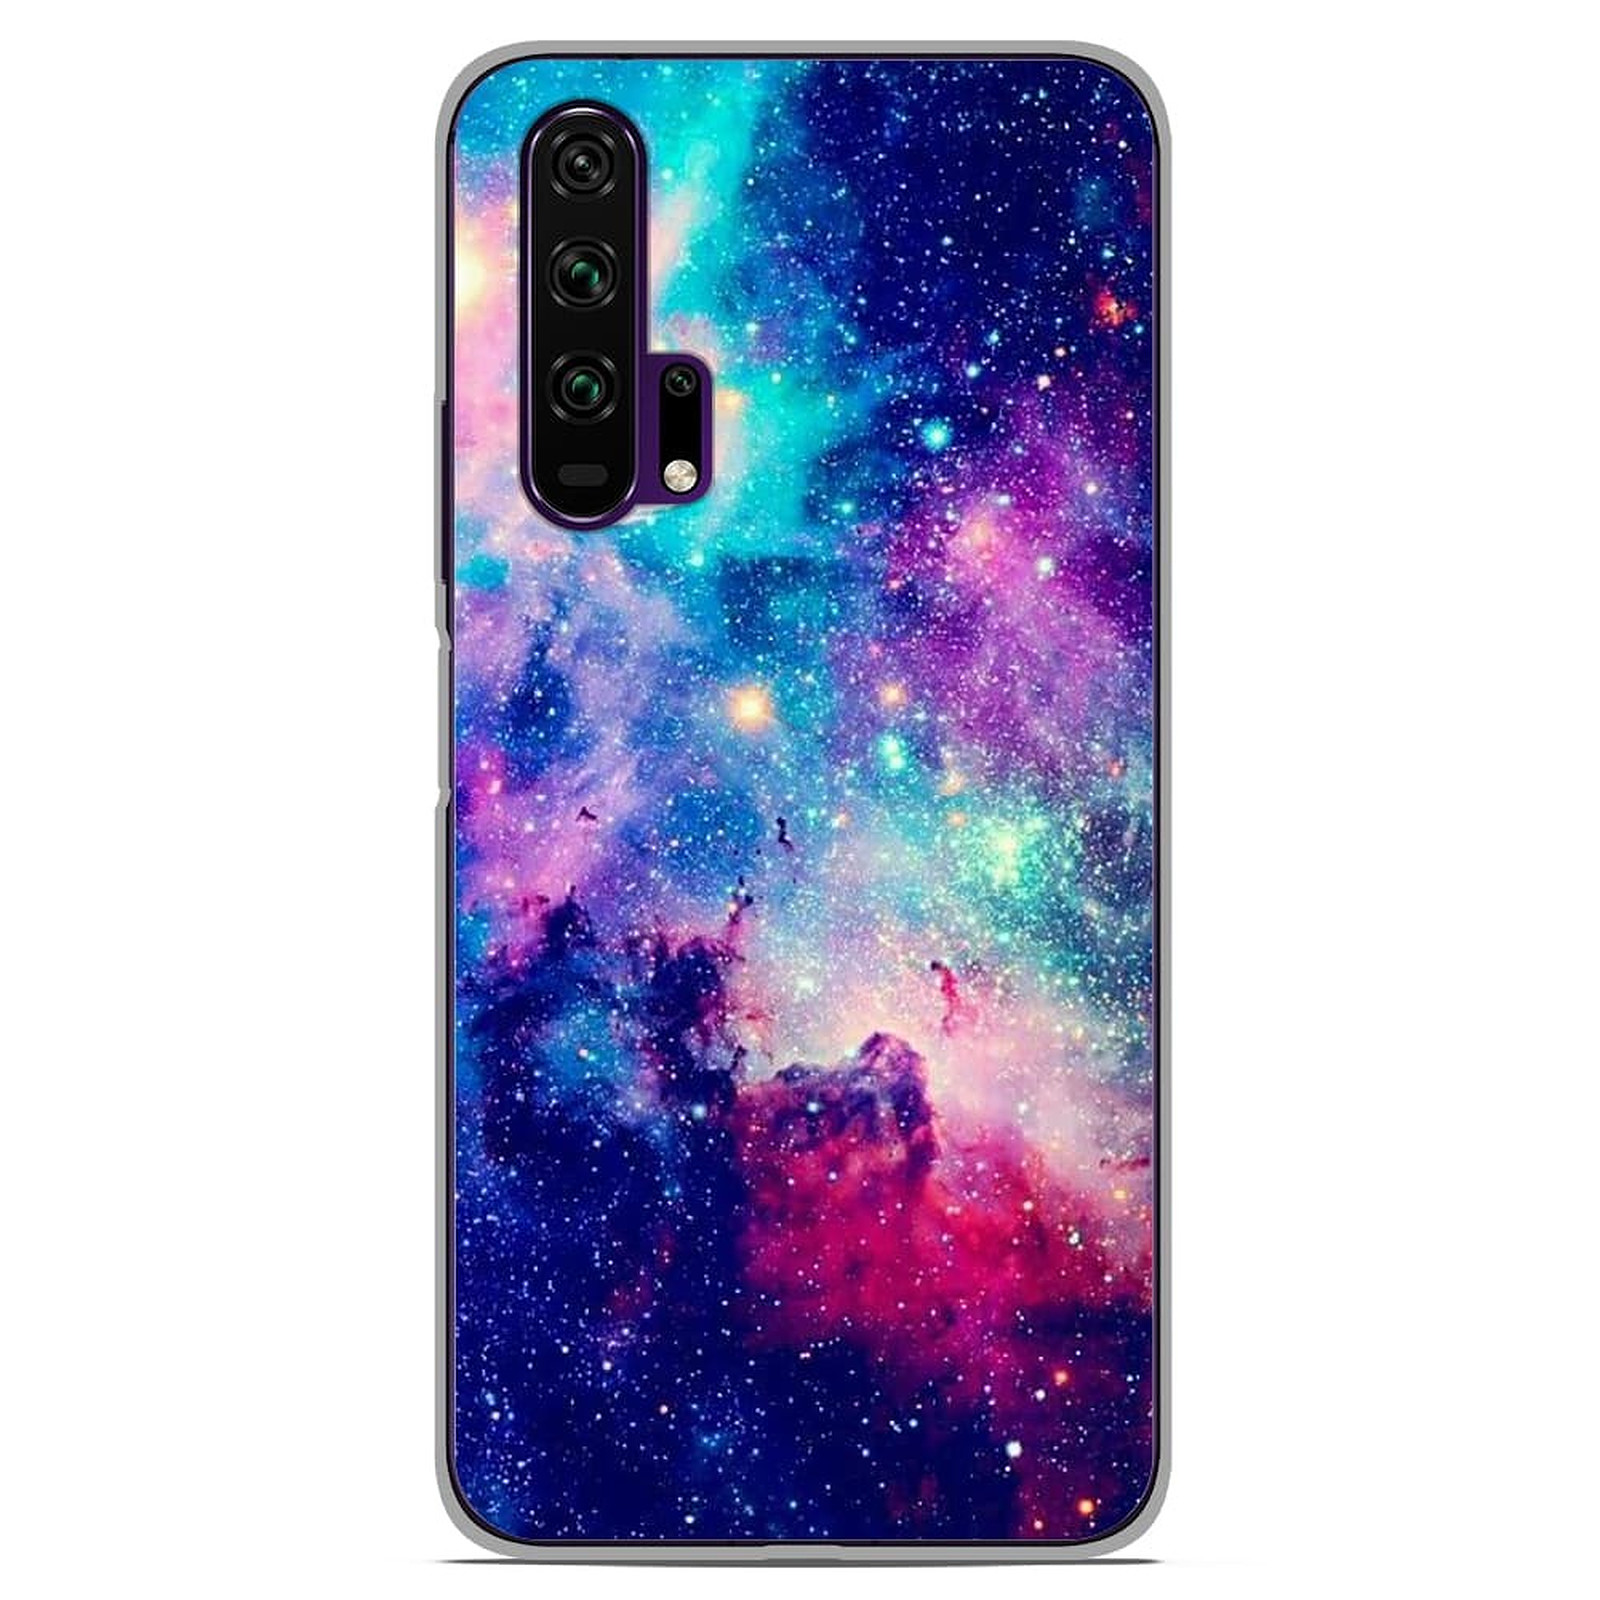 1001 Coques Coque silicone gel Huawei Honor 20 Pro motif Galaxie Bleue - Coque telephone 1001Coques